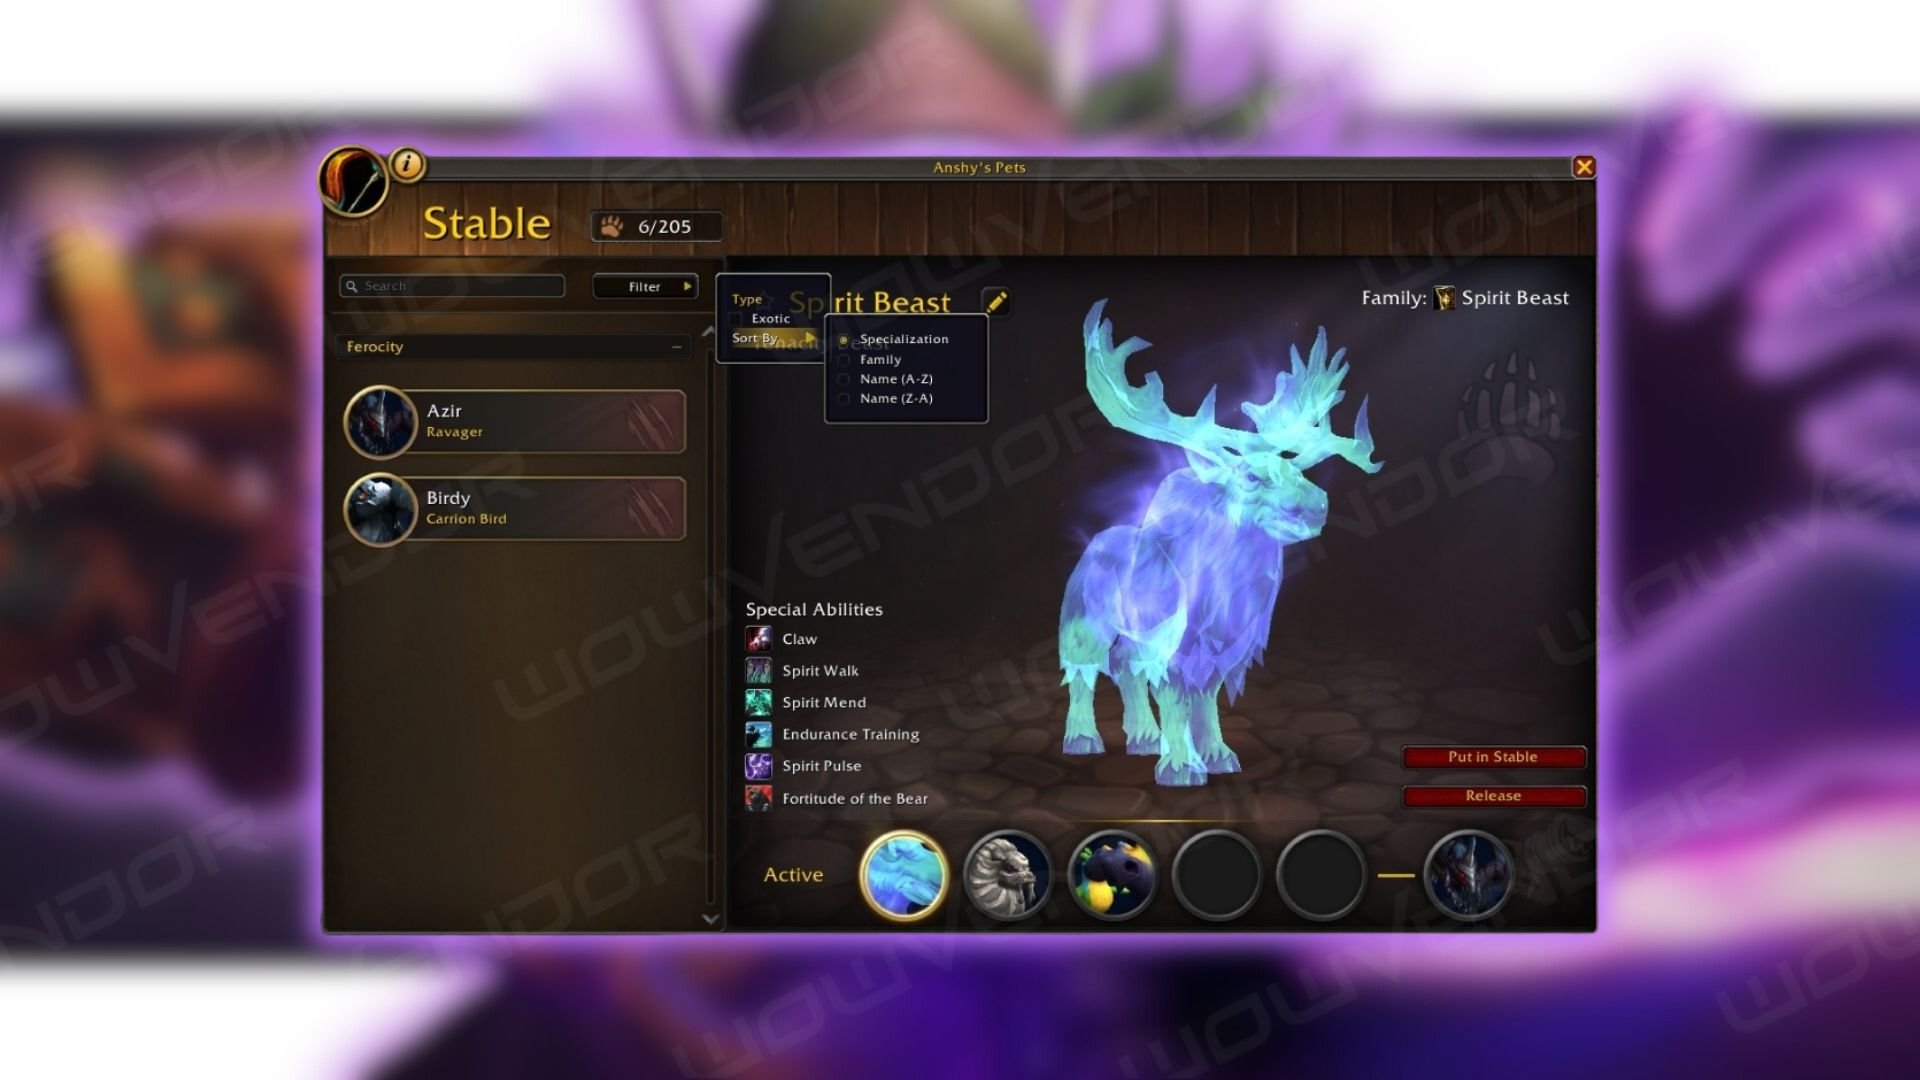 UI changes to the Pet Stable Interface in the new Dark Heart Patch 10.2.7 update